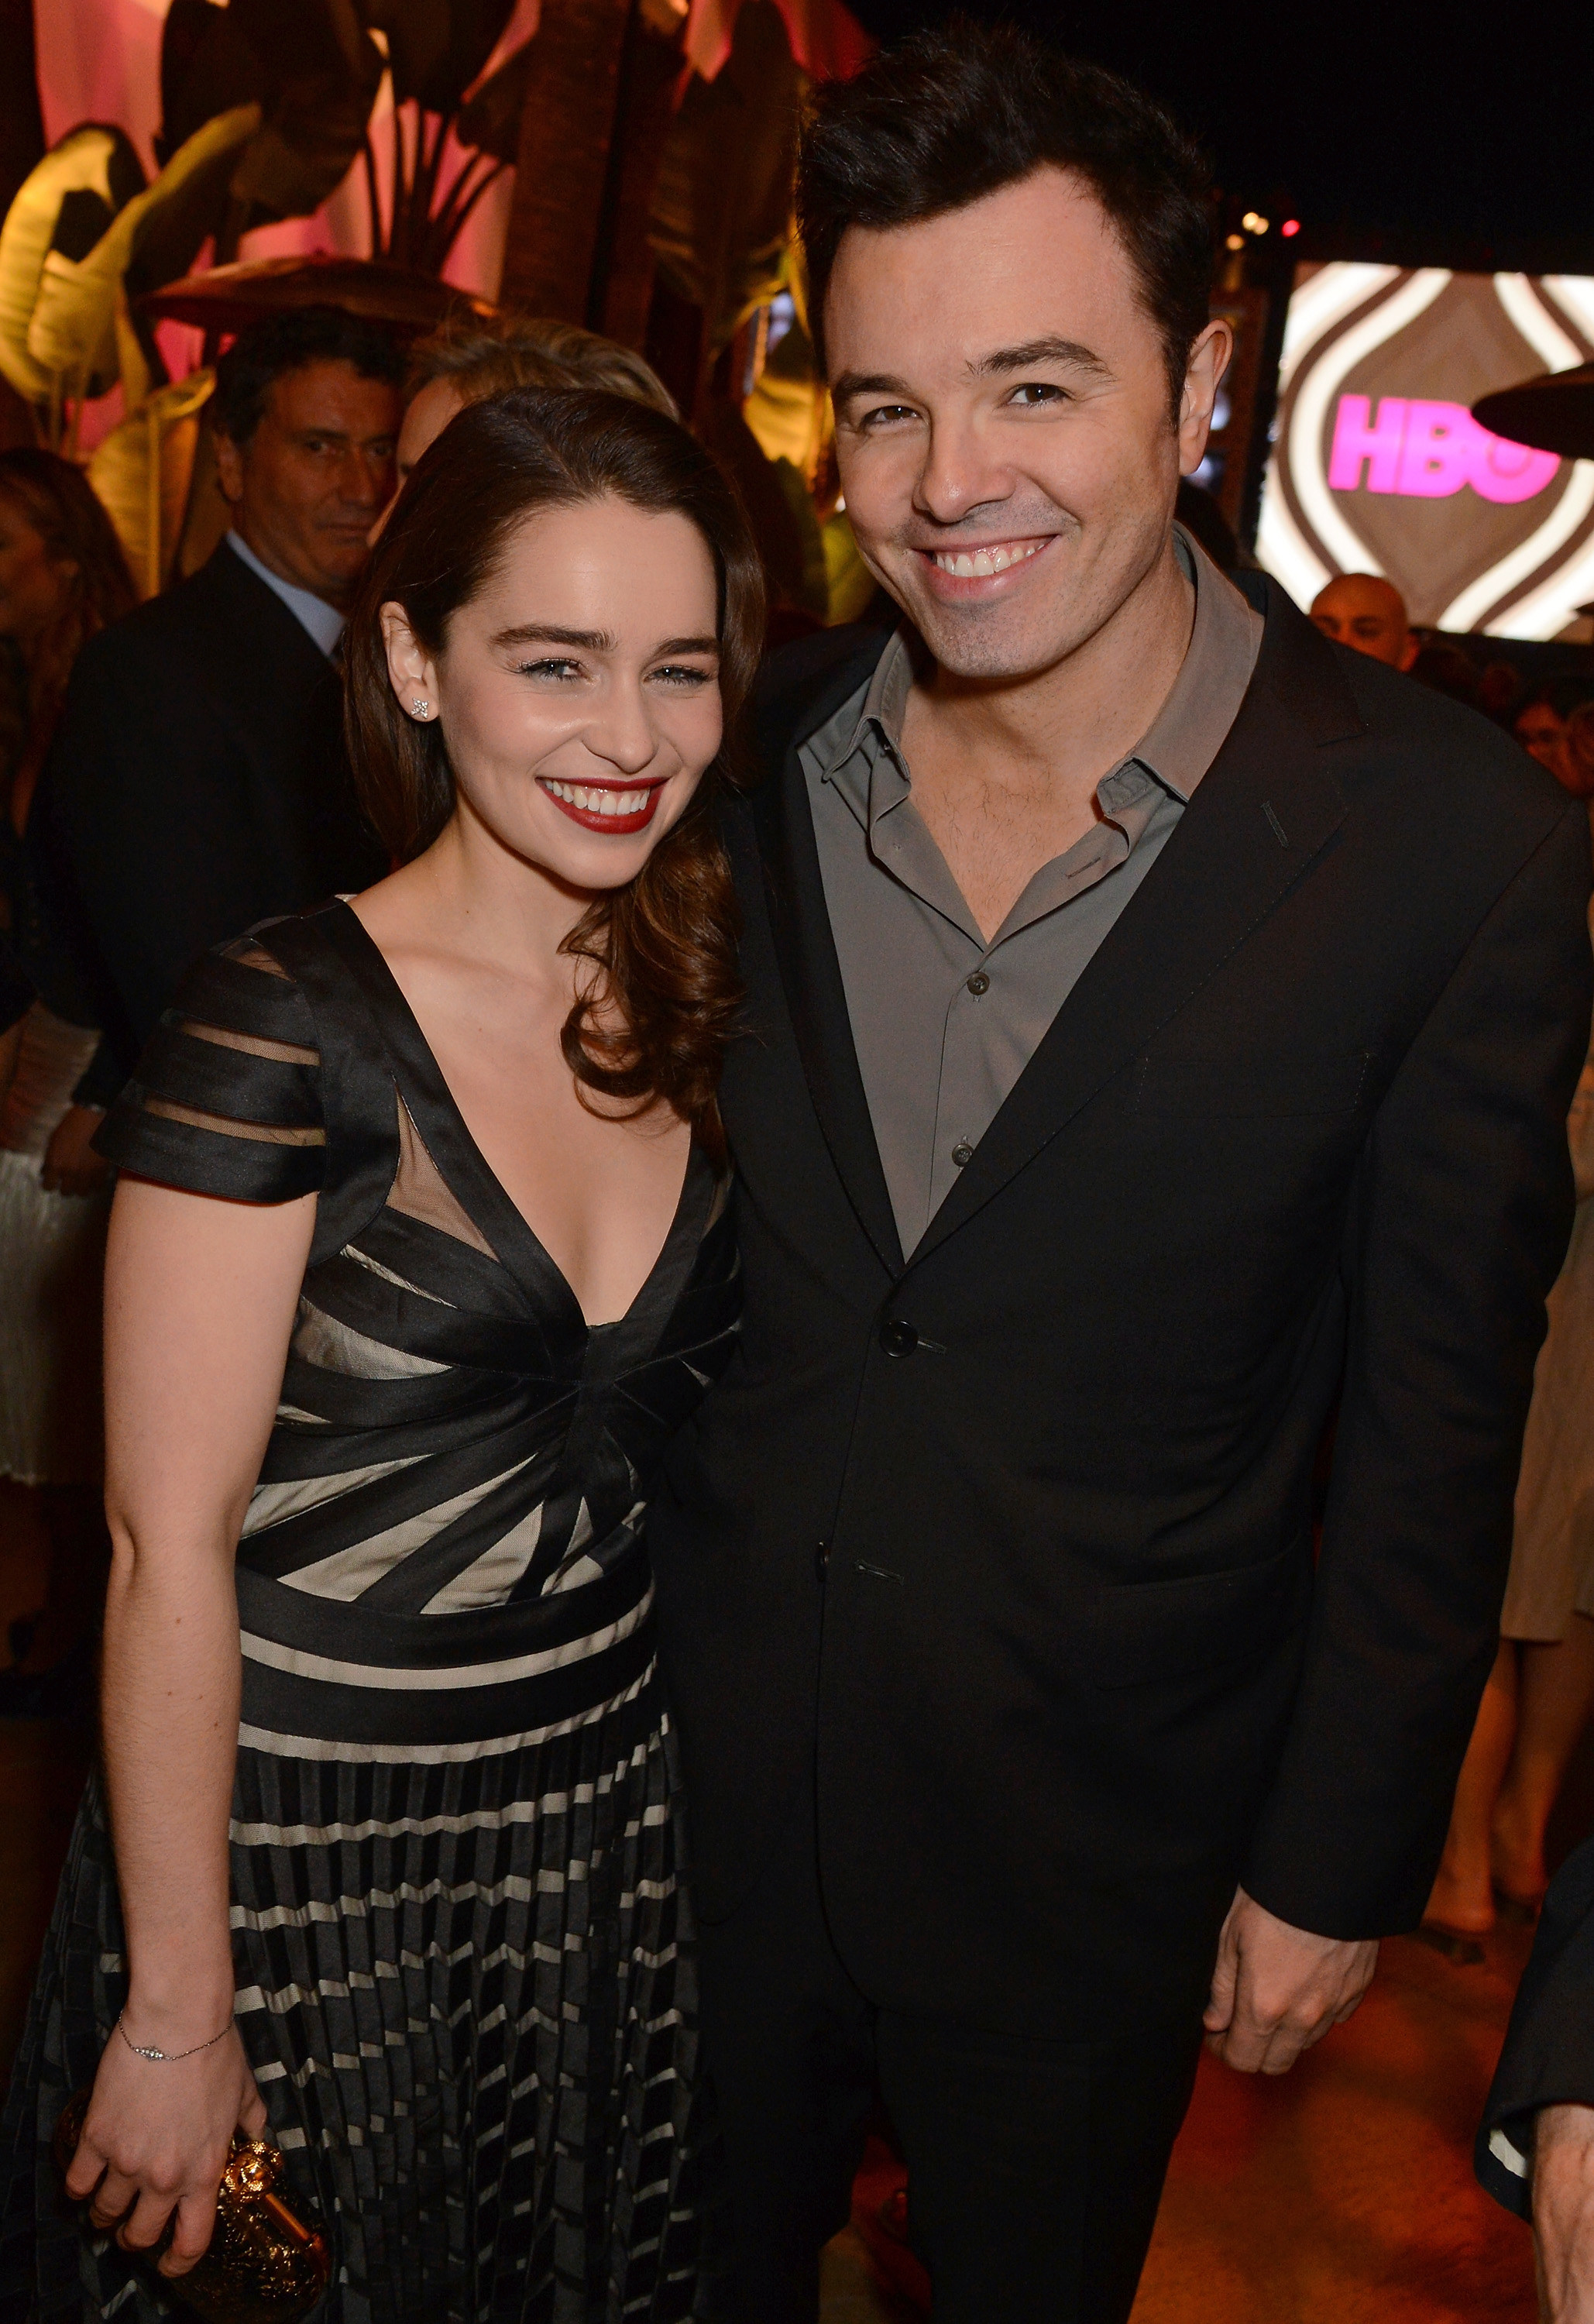 Seth MacFarlane and Emilia Clarke posing together at an event, they&#x27;re both wearing formalwear and smiling